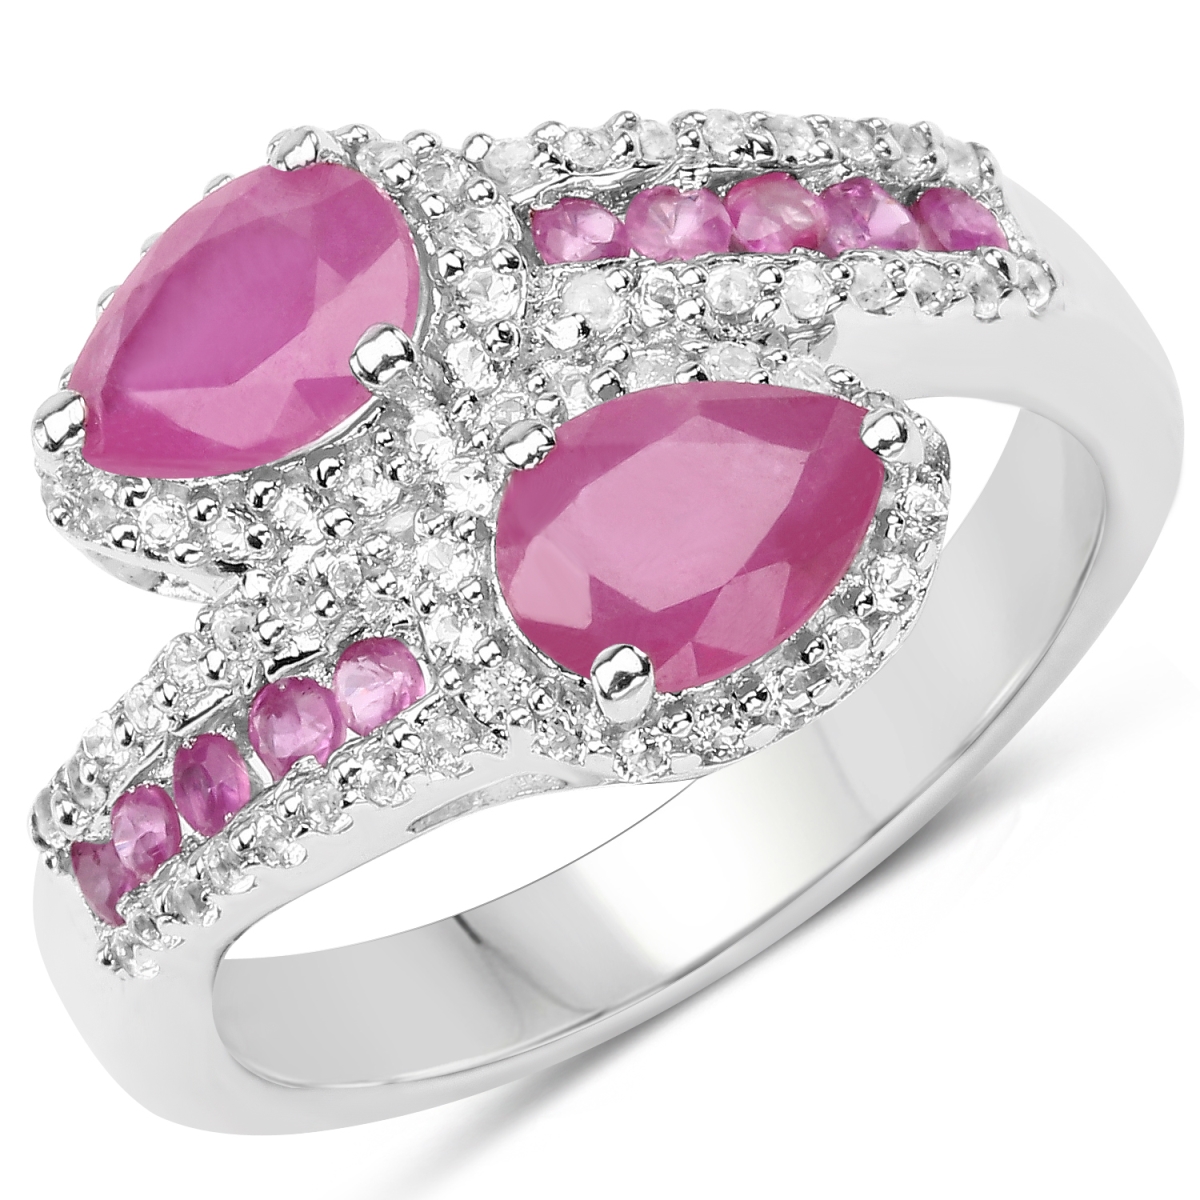 Picture of Malaika QR15814GFRRWT-SSR-10 2.43 Carat Glass Filled Ruby & White Topaz Sterling Silver Ring